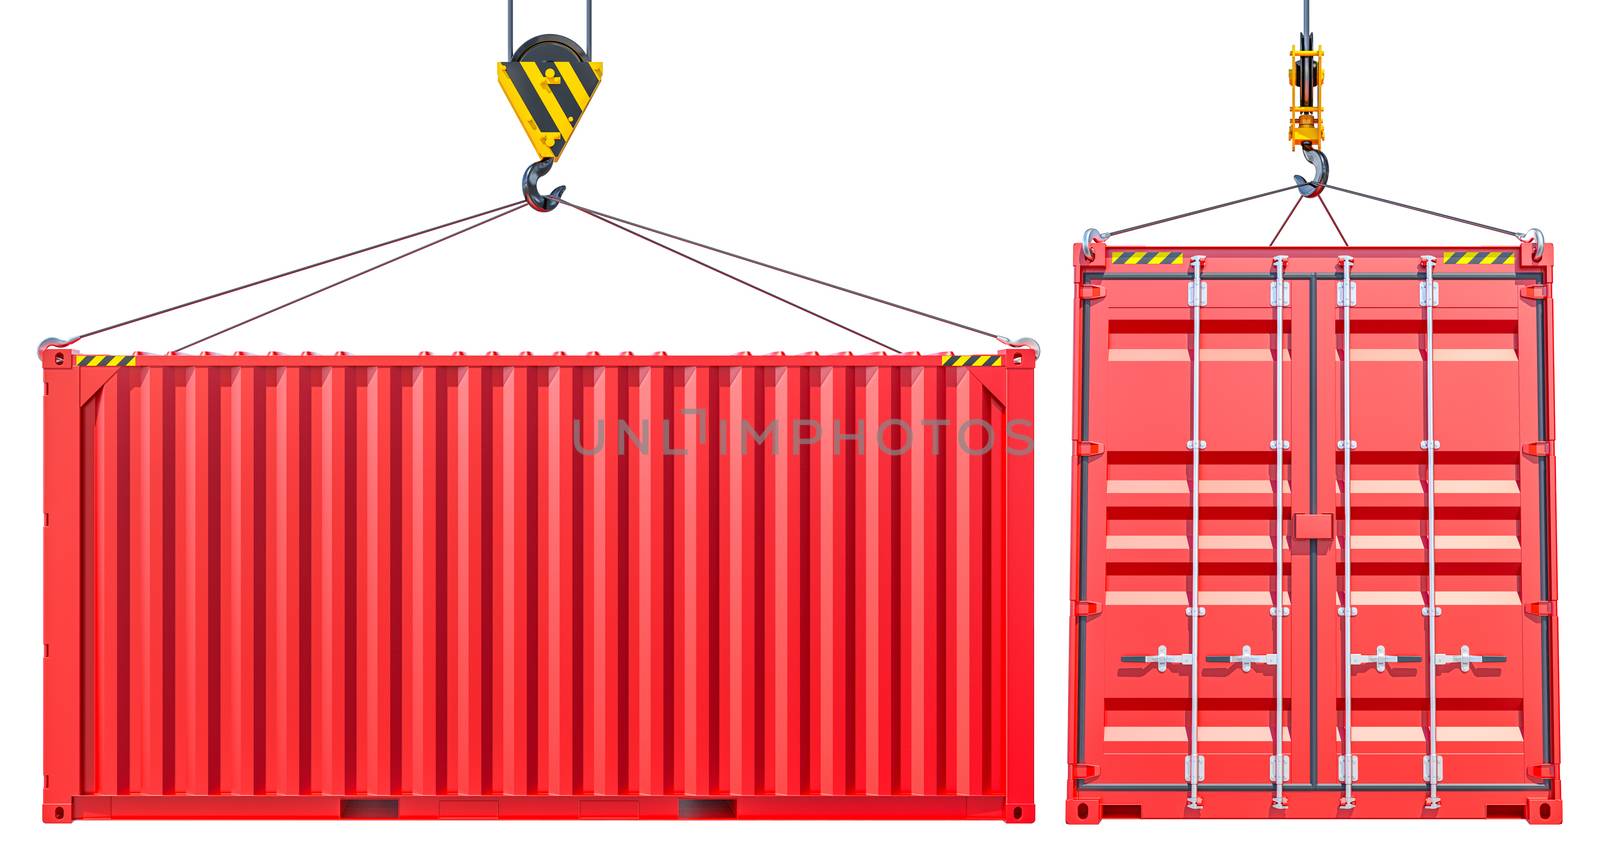 Red Shipping Cargo Container With Hook. Transportation Concept. Isolated on White Background. 3d Illustration.